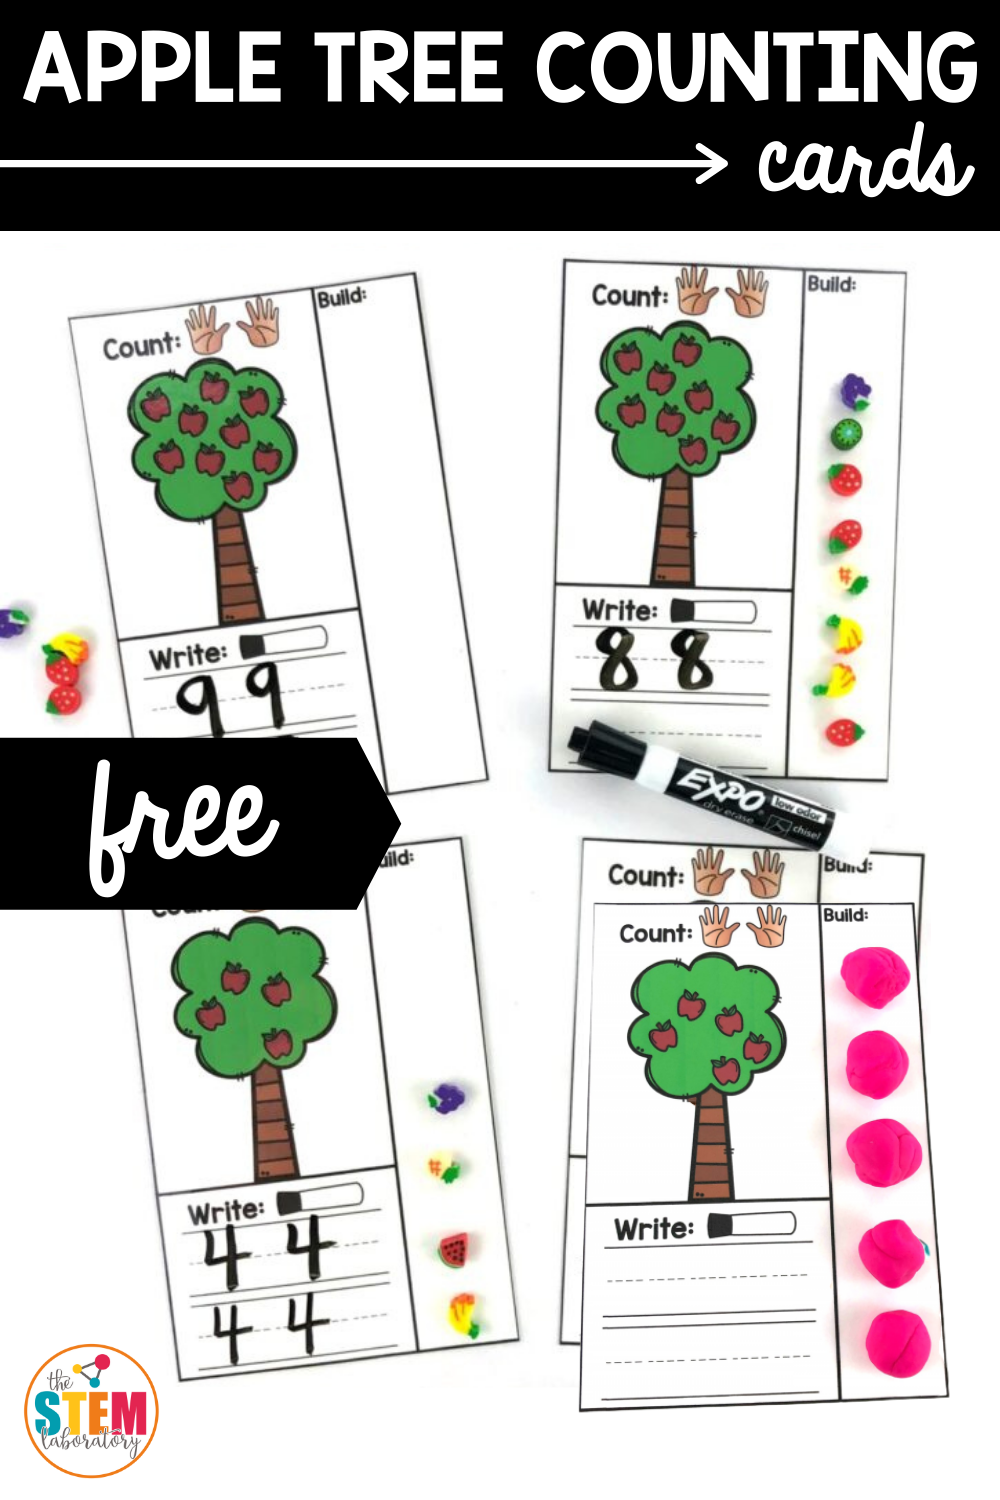 Apple Tree Counting Cards